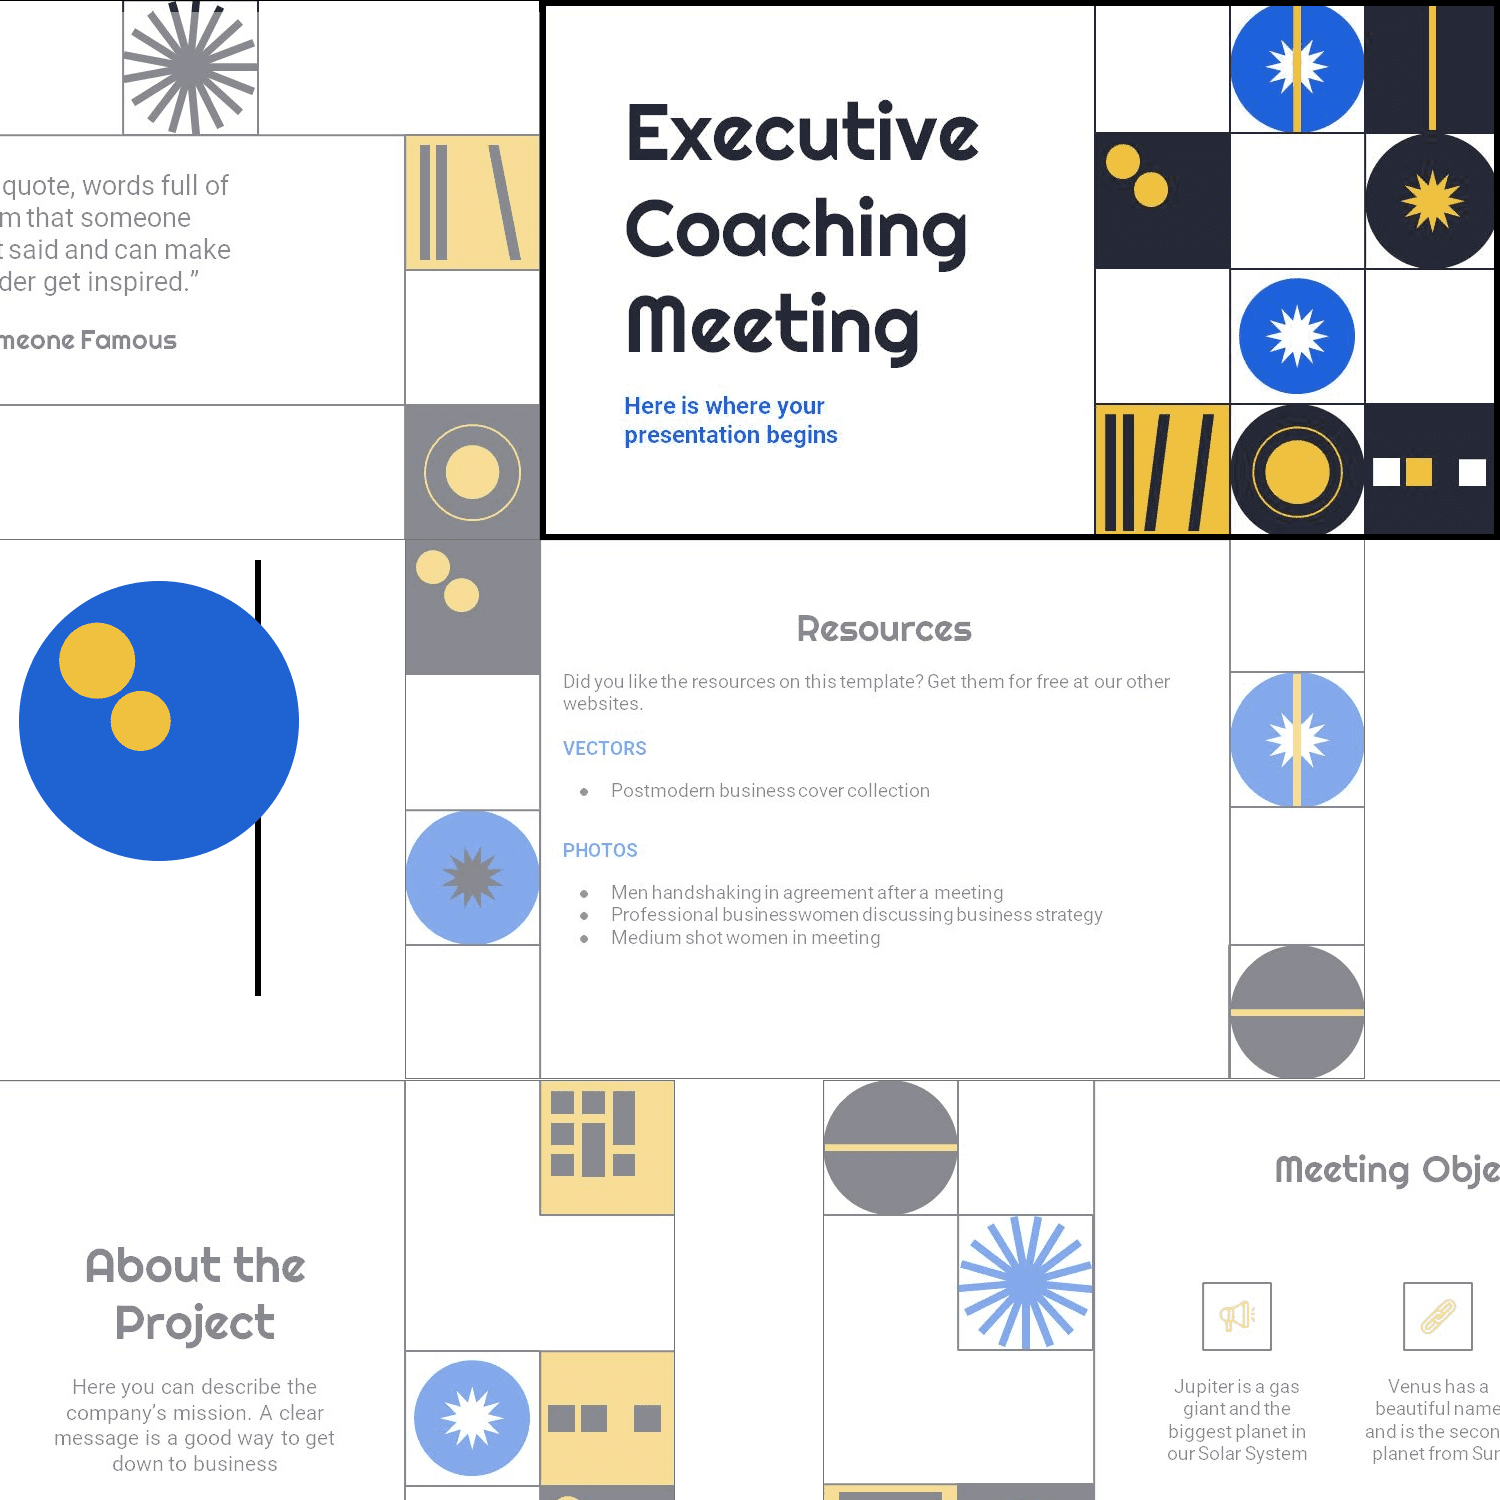 Free Executive Coaching Meeting Powerpoint Template.